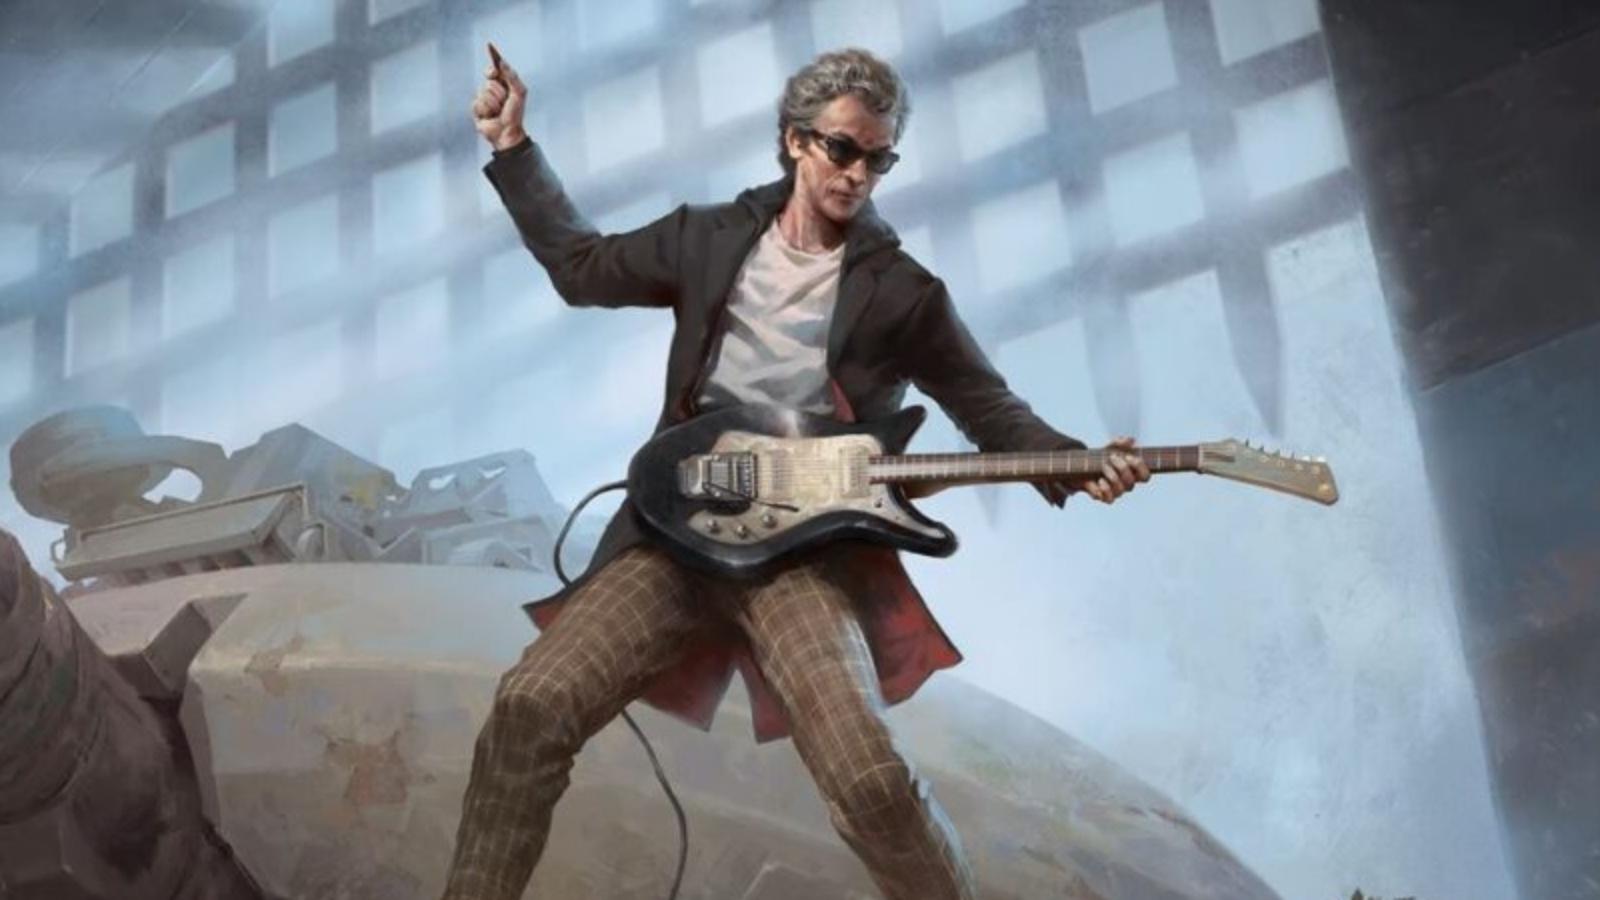 Twelfth Doctor rides a tank